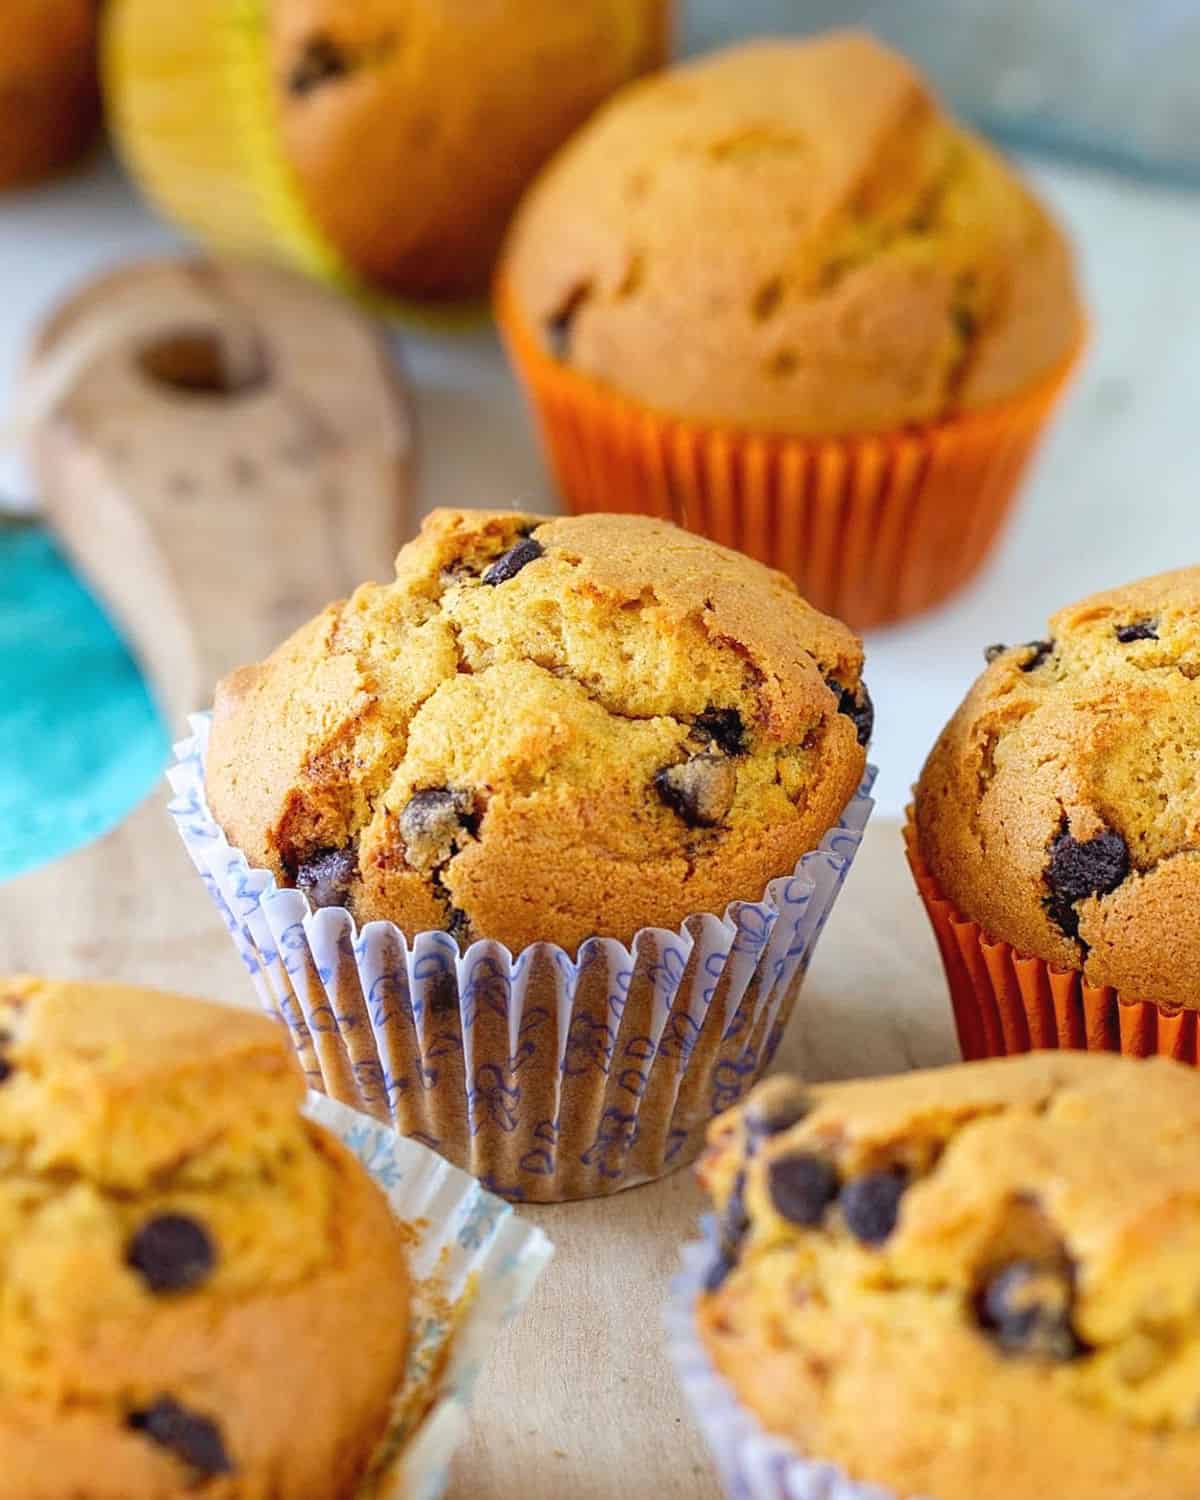 Several chocolate chip pumpkin muffins on a light wooden board, colorful paper cups